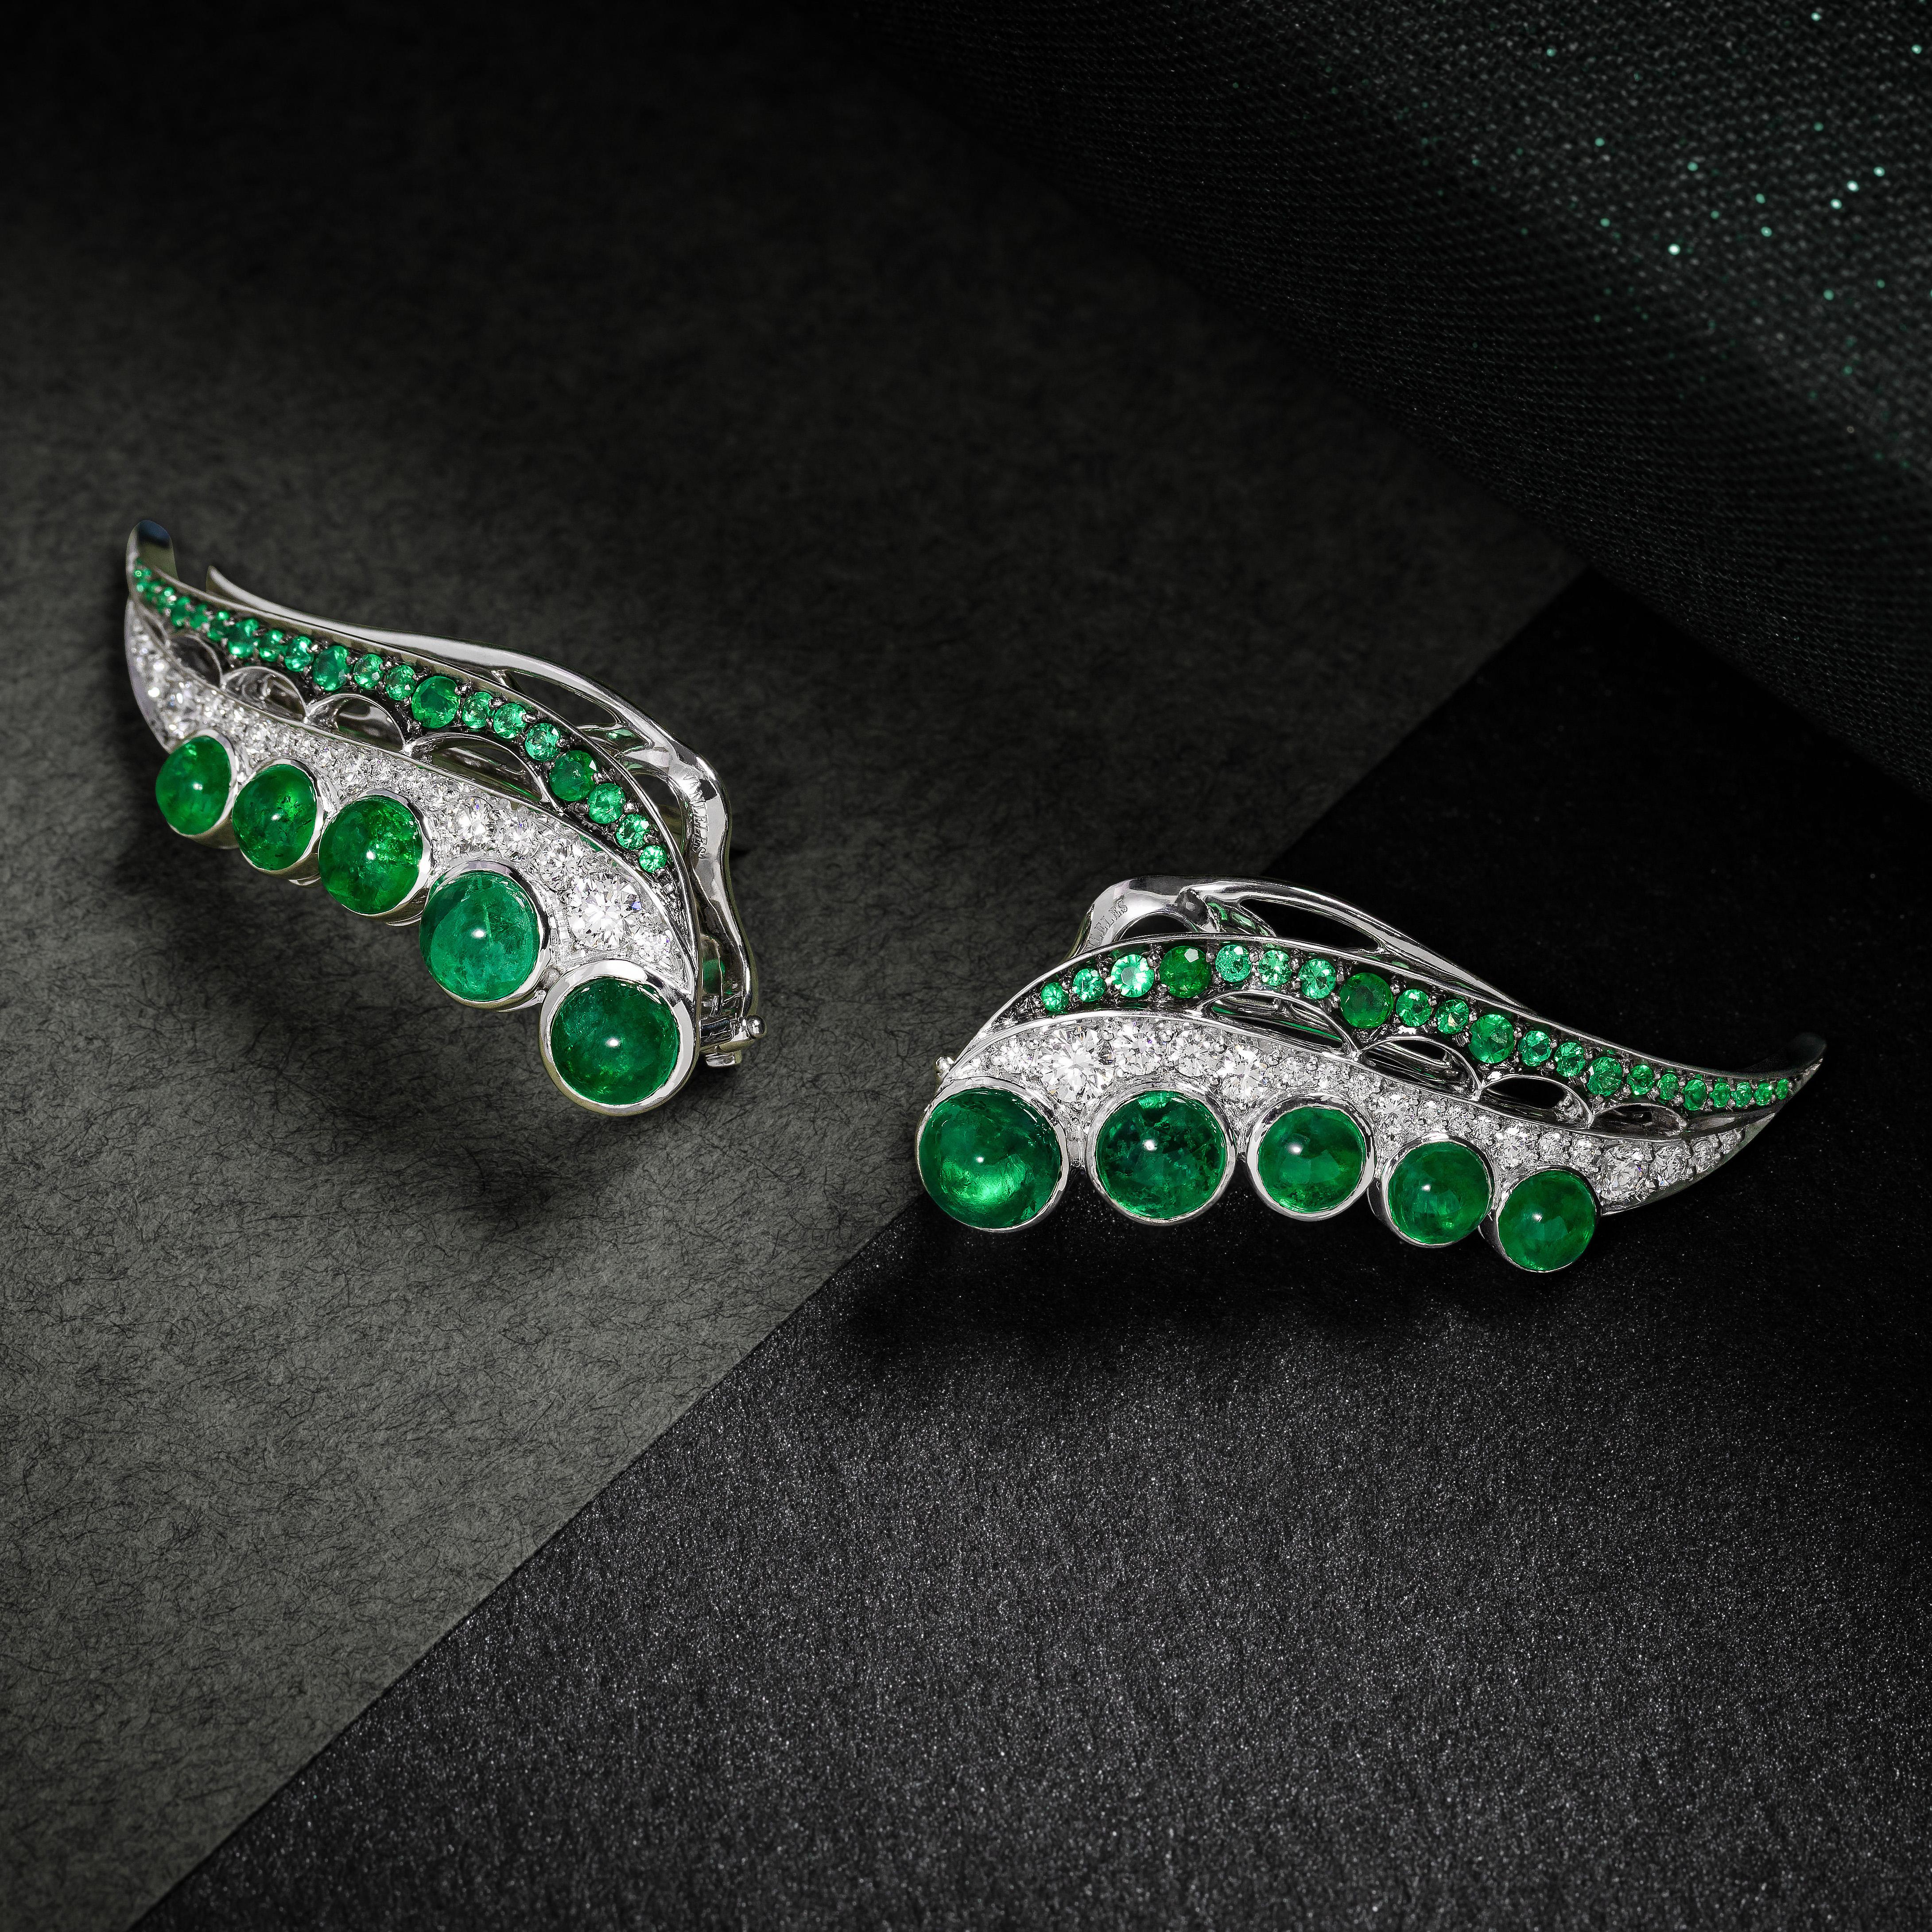 Cabochon 18 Karat White Gold, White Diamonds and Ethically Sourced Emeralds Earrings